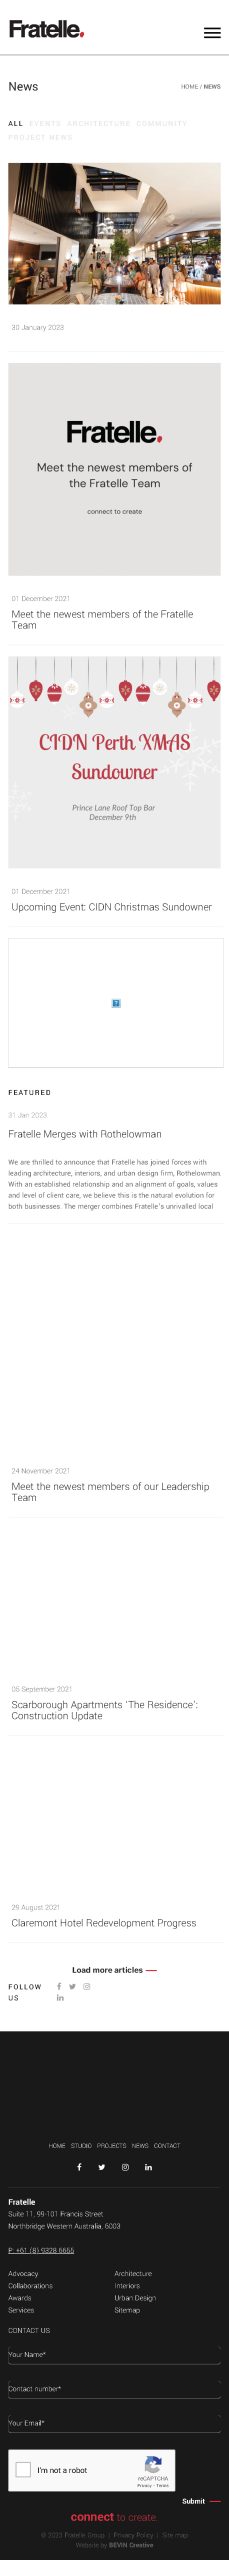 BEVIN CREATIVE – Perth Architecture News Fratelle